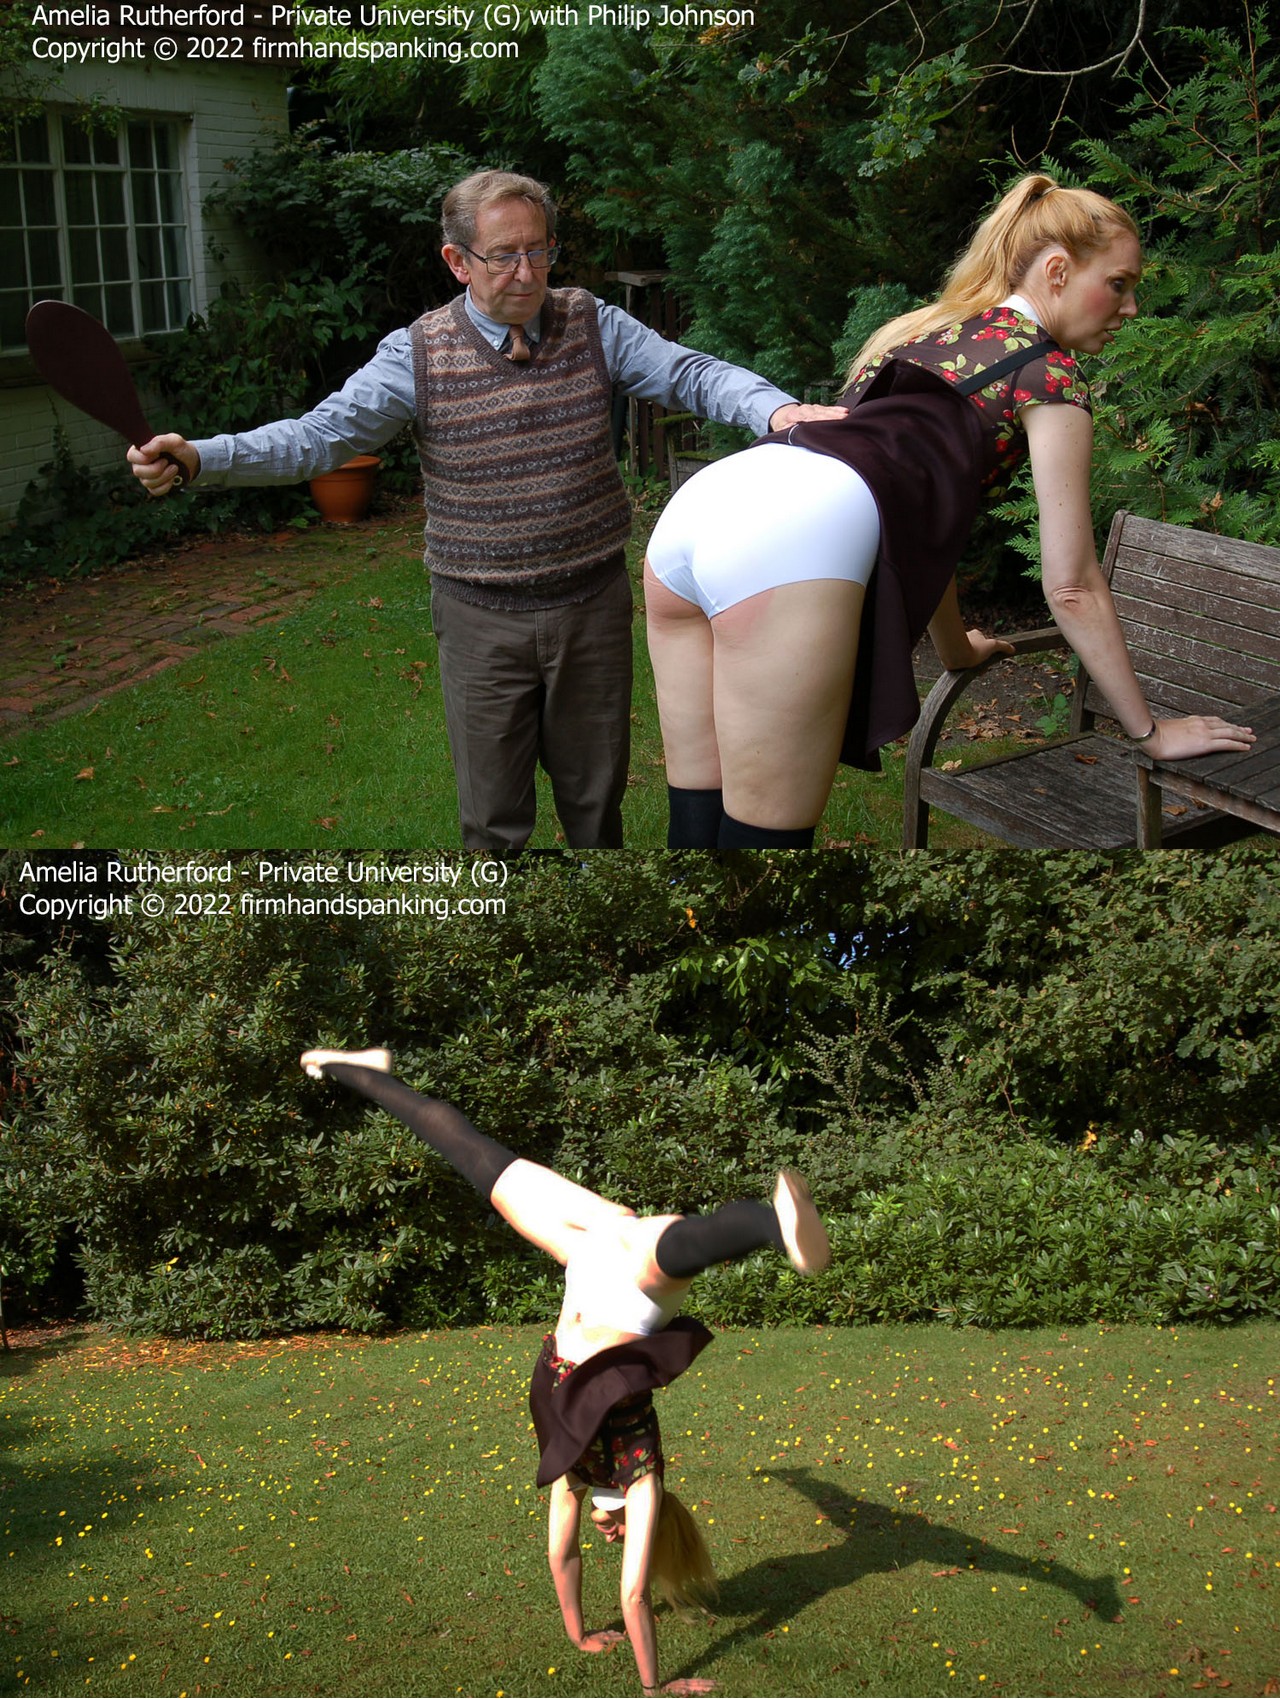 Firm Hand Spanking – MP4/HD – Amelia Rutherford – Private University – G/Cartwheeling Amelia Rutherford caught in the professor’s garden and paddled (Release date: Jan 24, 2022)